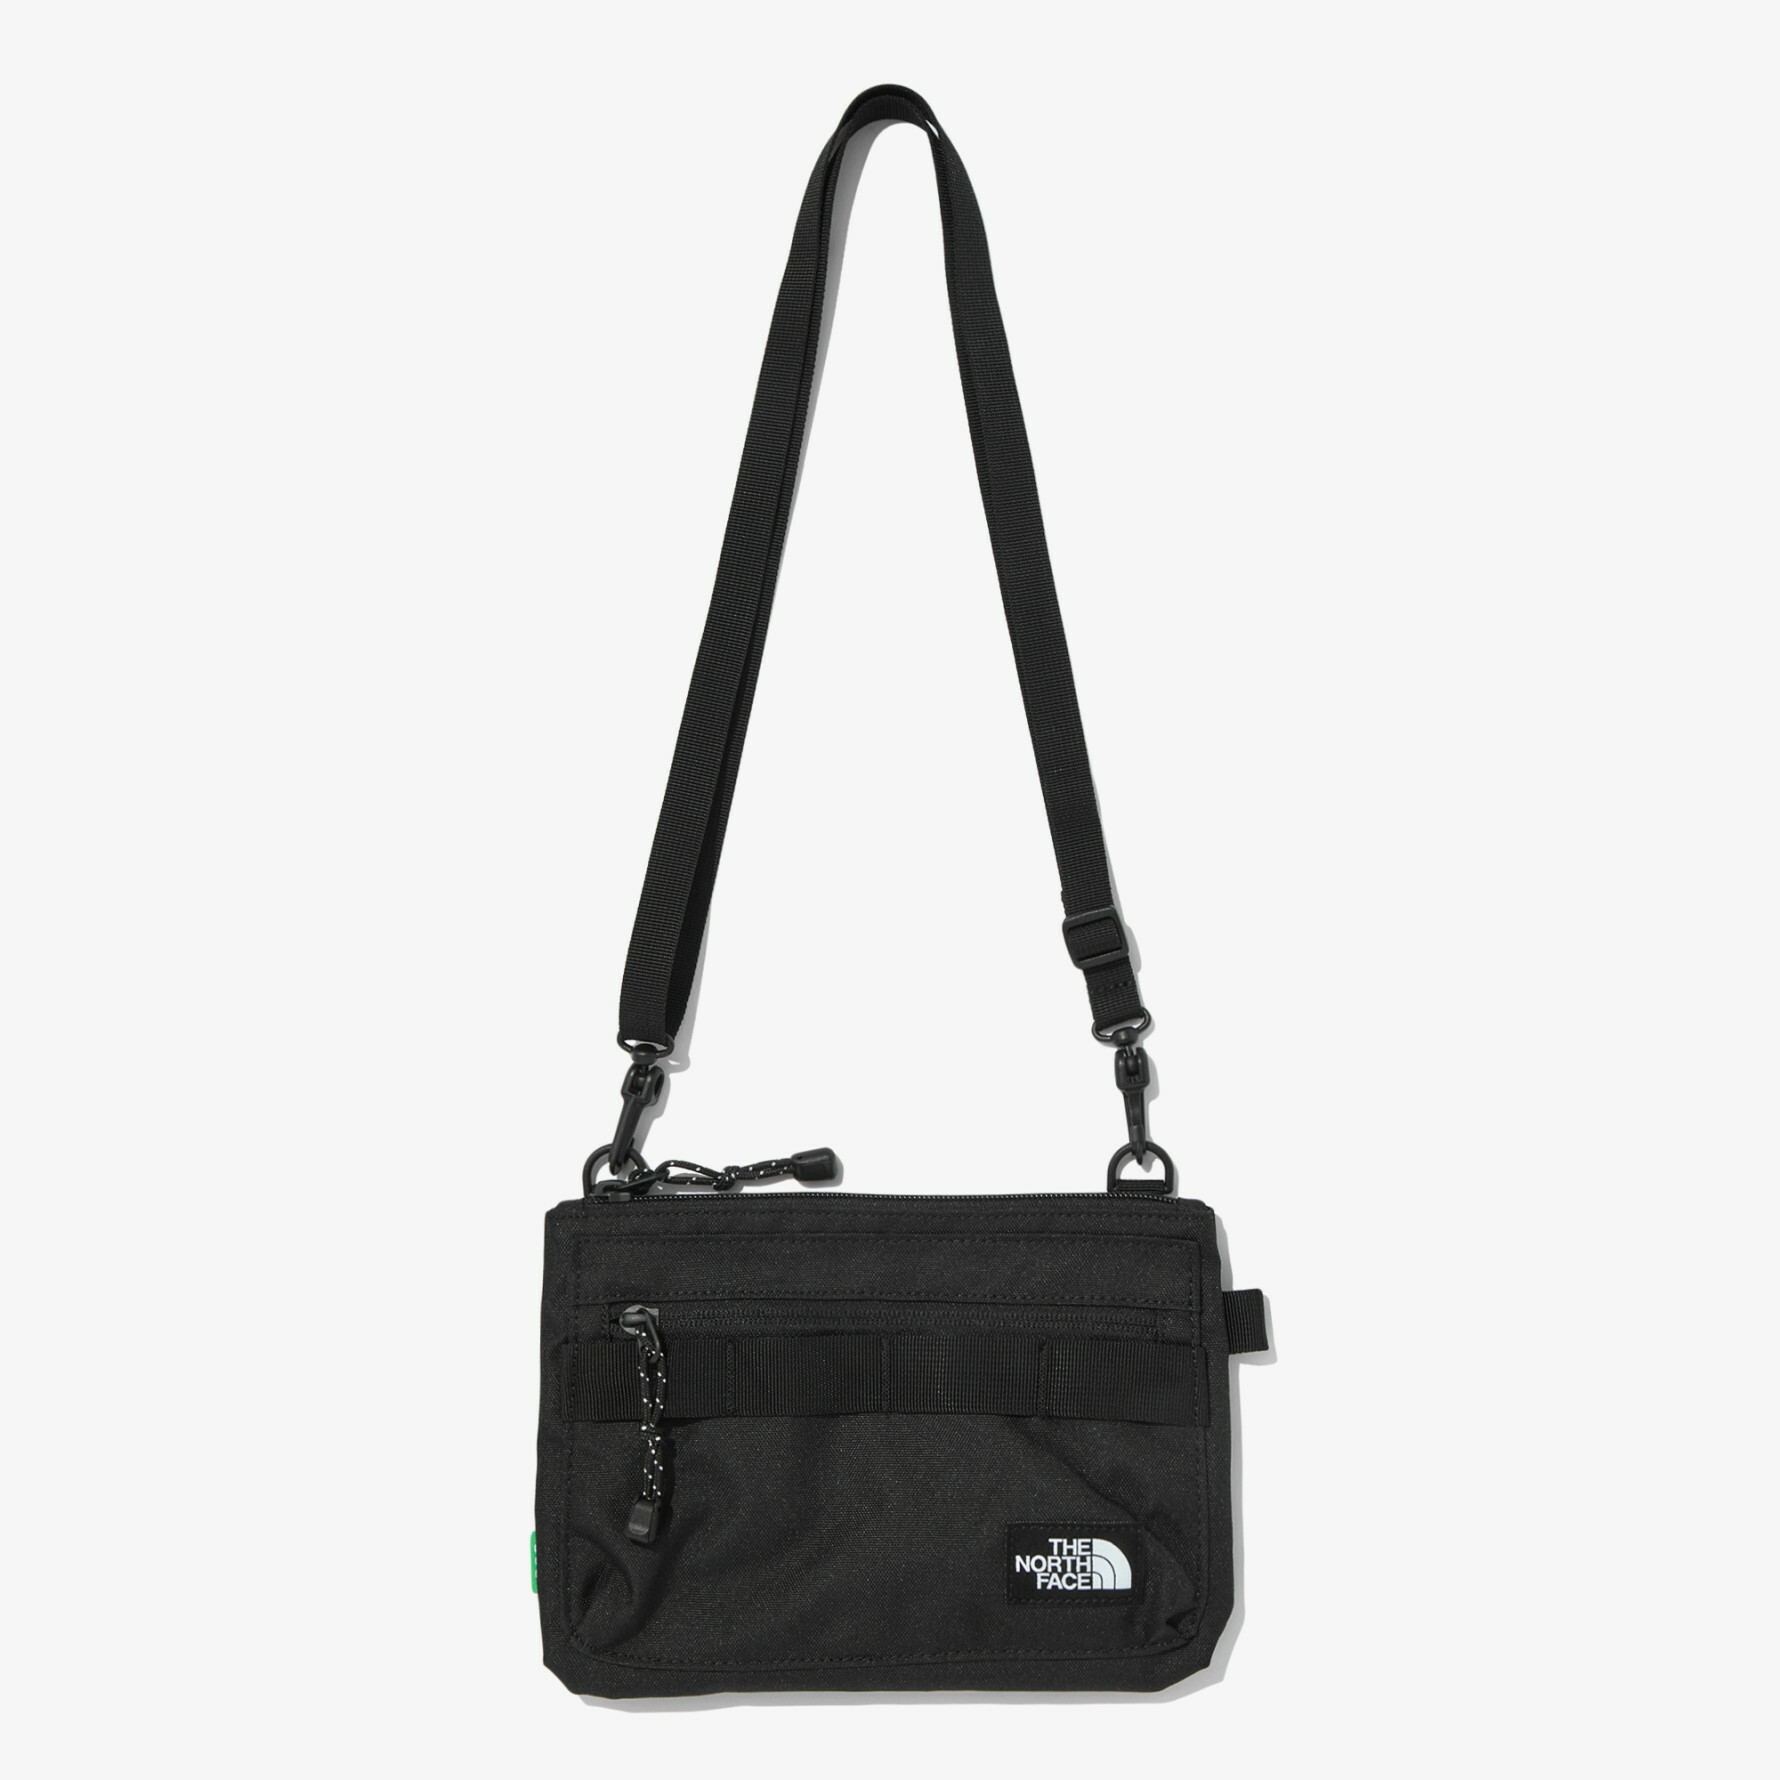 THE NORTH FACE CAMP CROSS BAG 側背包方形包黑NN2PN64A